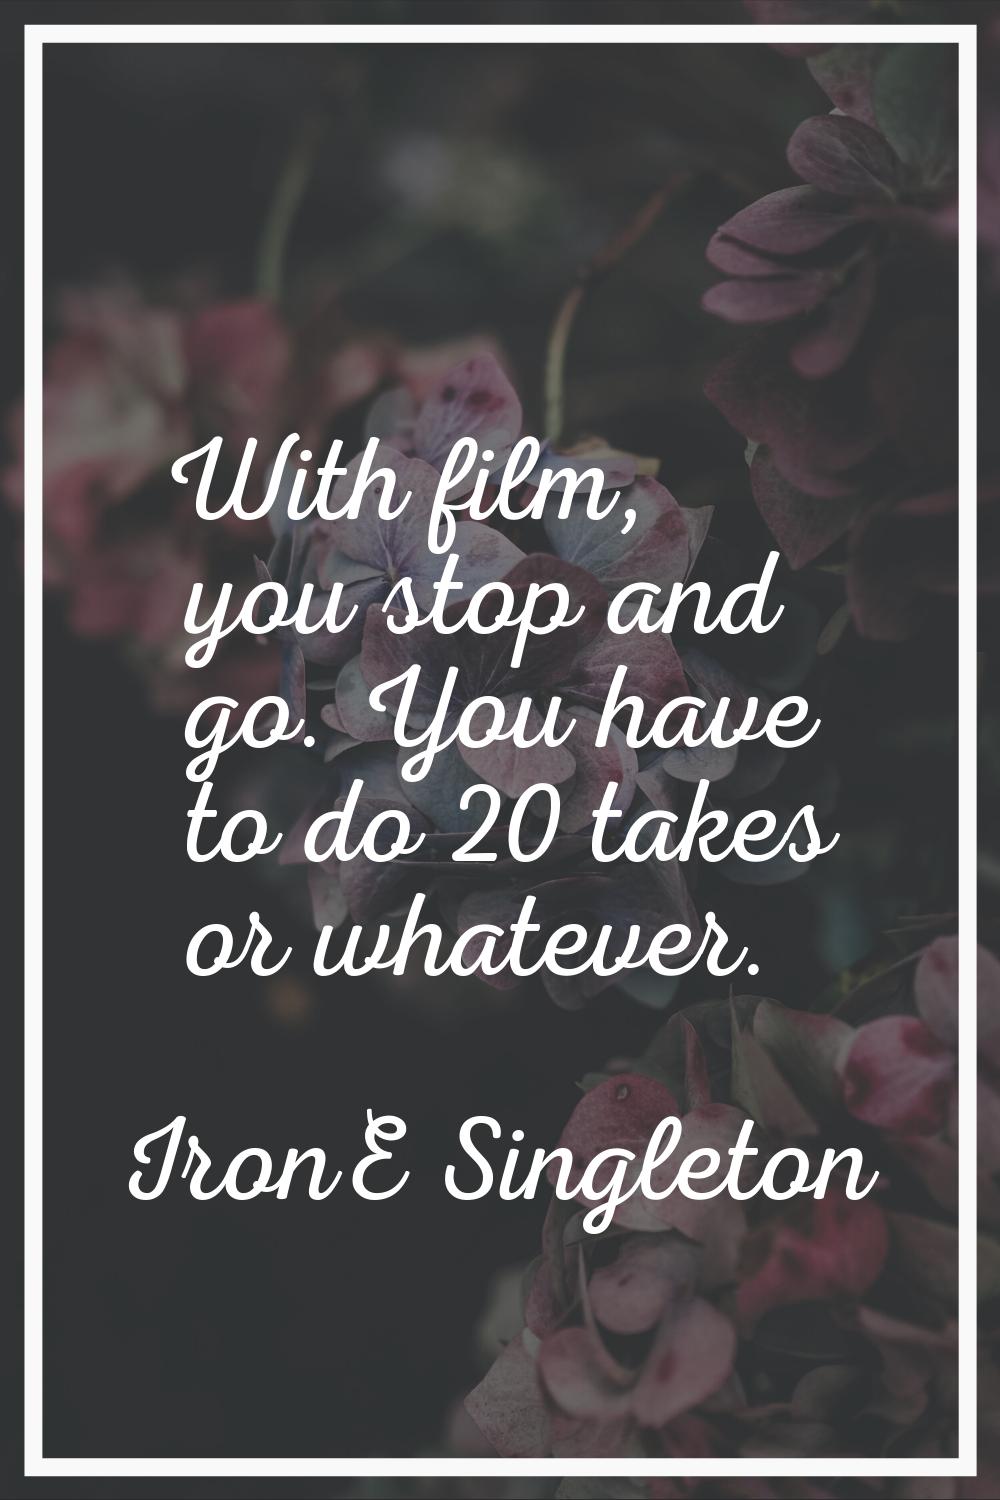 With film, you stop and go. You have to do 20 takes or whatever.